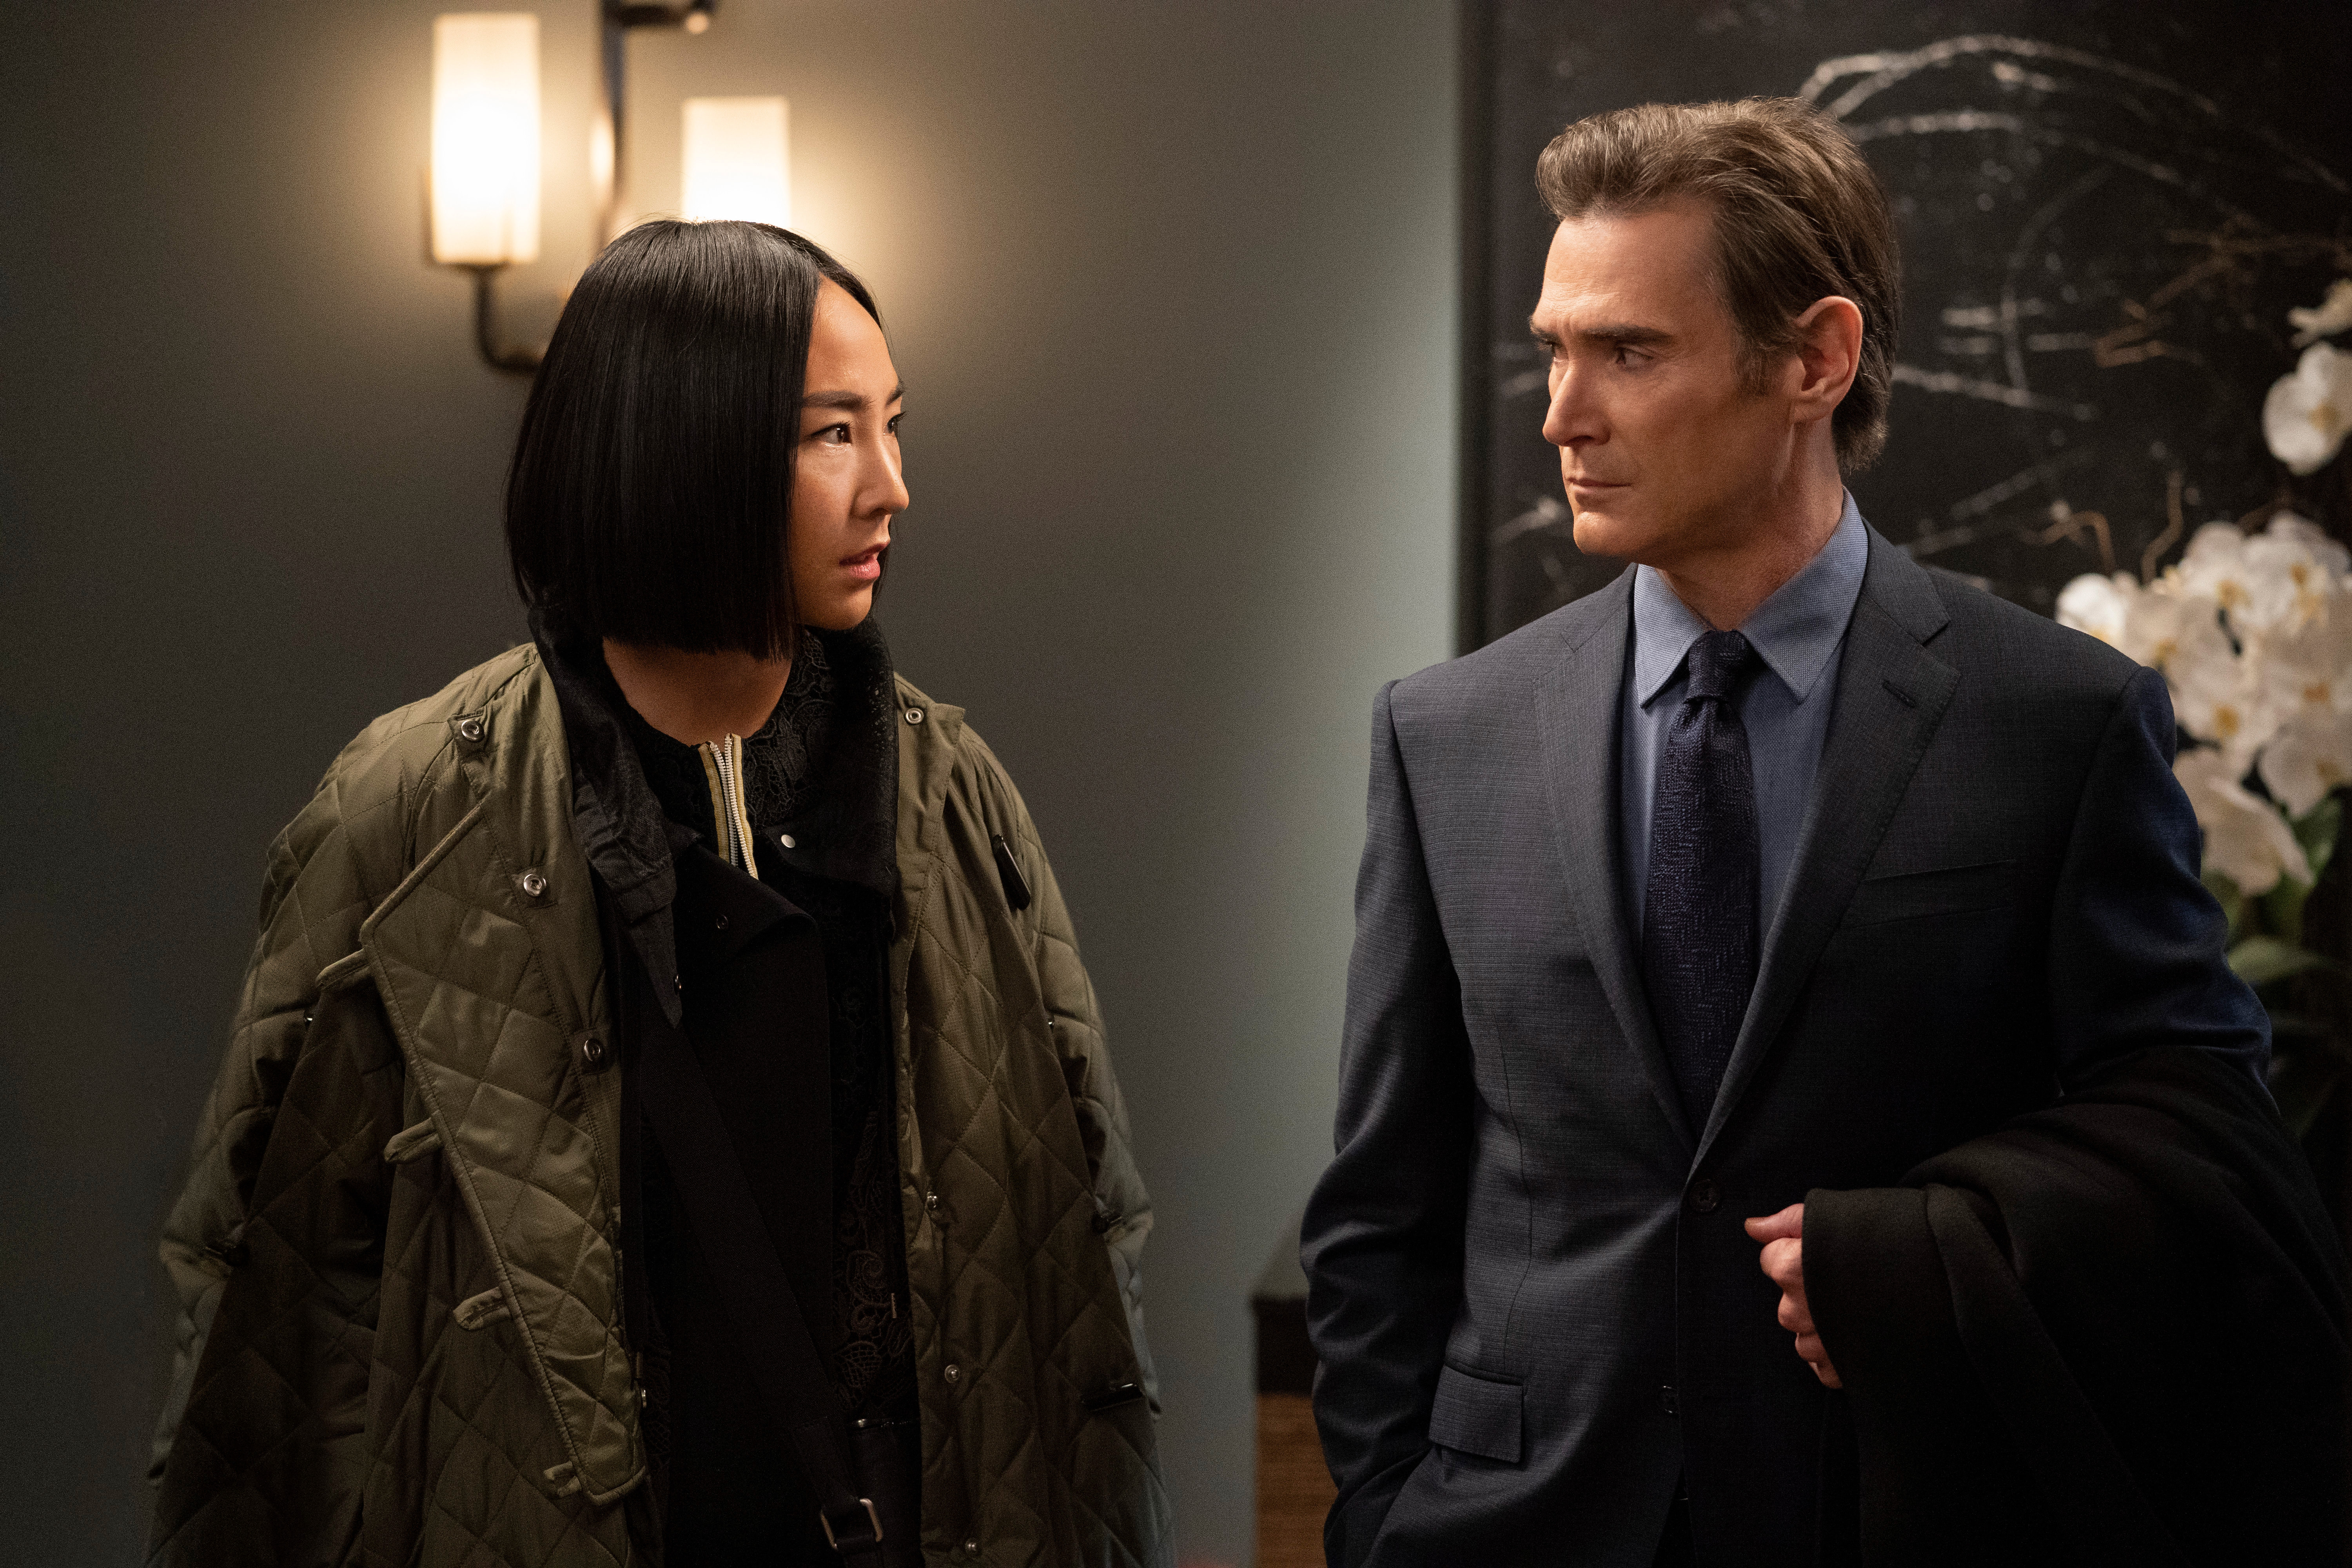 Billy Crudup and Greta Lee in The Morning Show (2019)